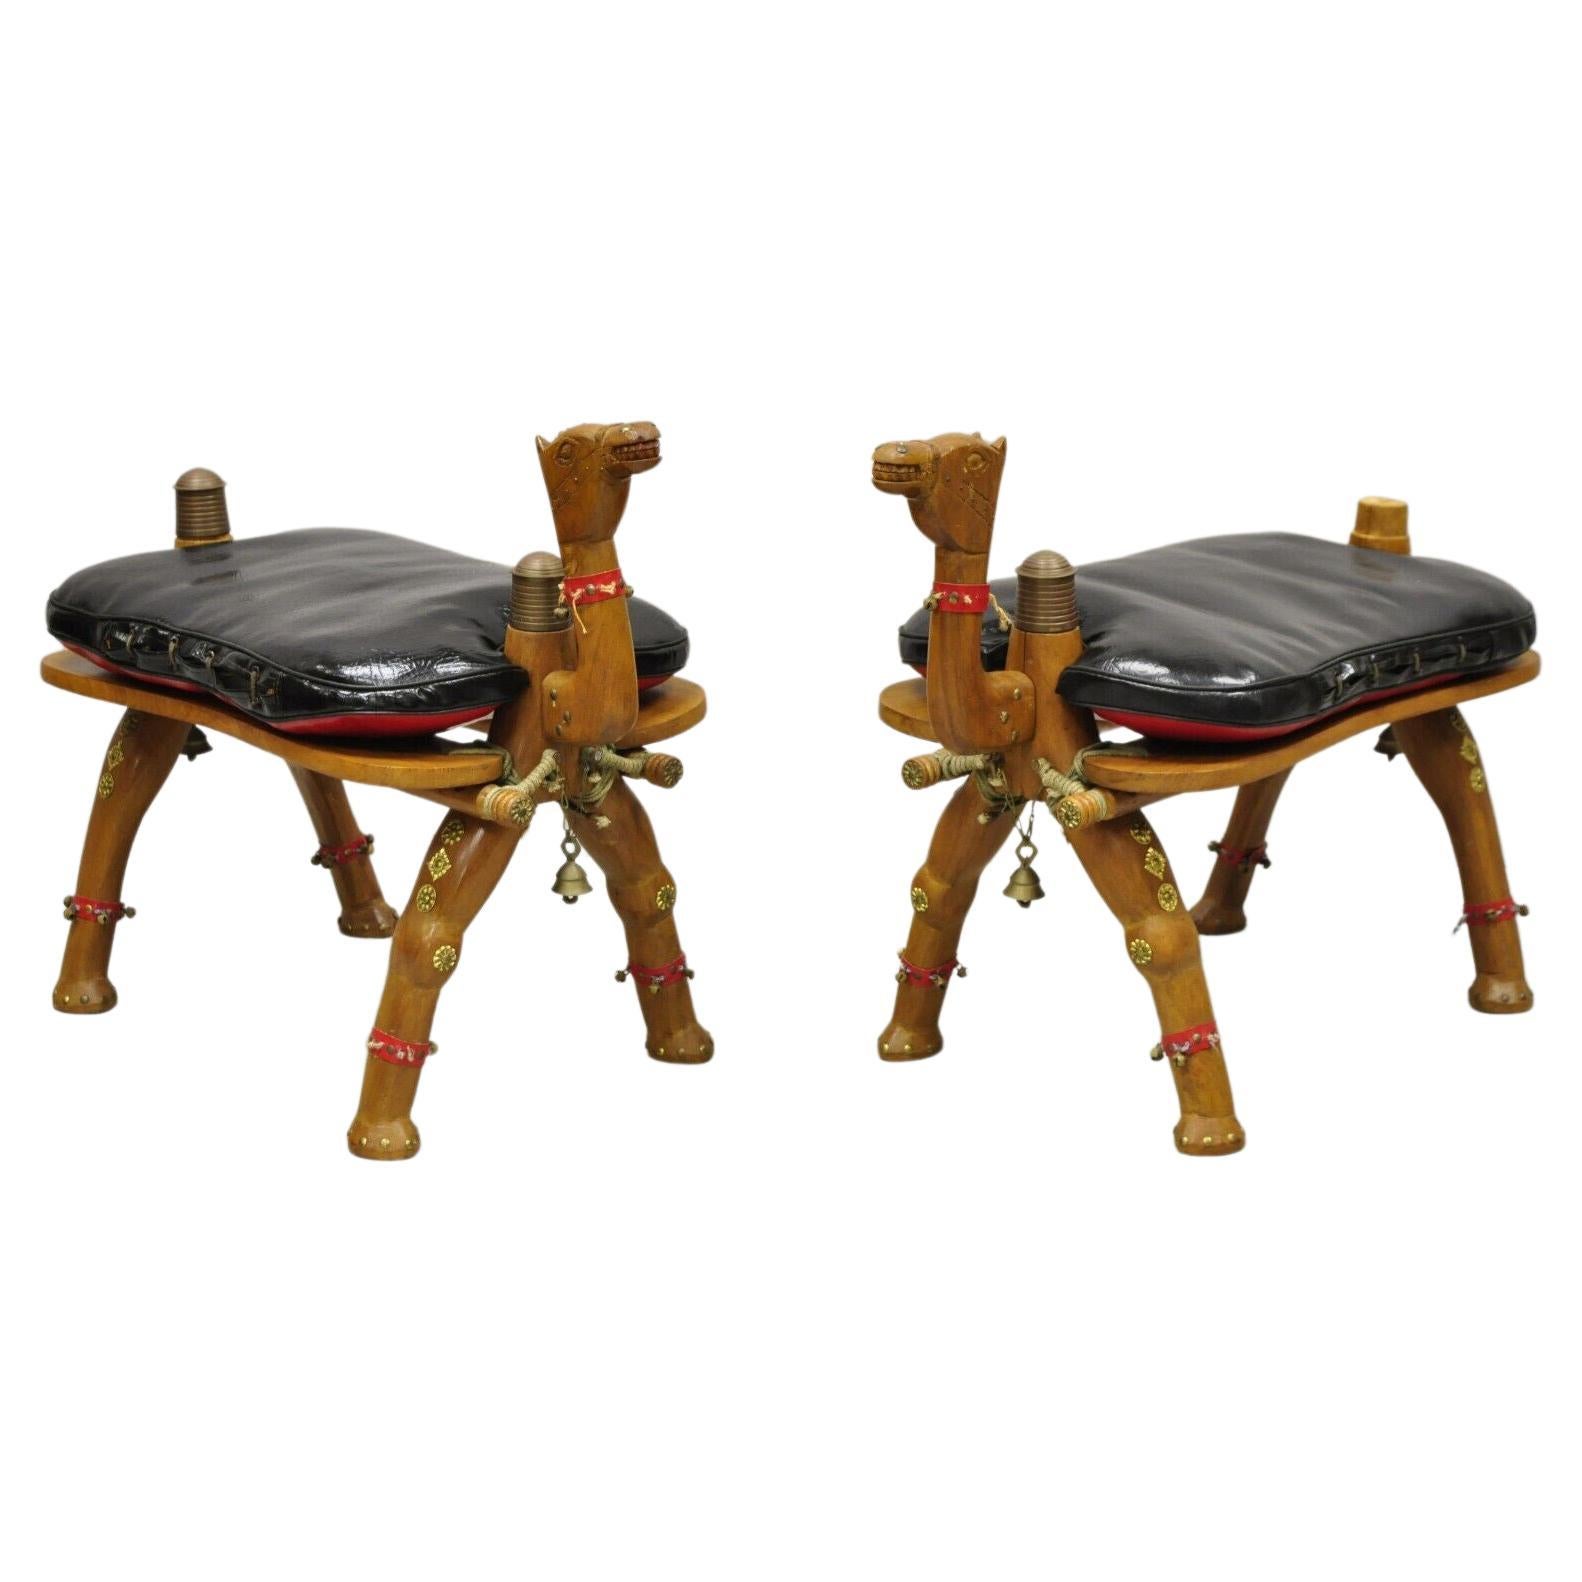 Vintage Camel Saddle Stools Carved Wood Black/Red Cushions, a Pair For Sale